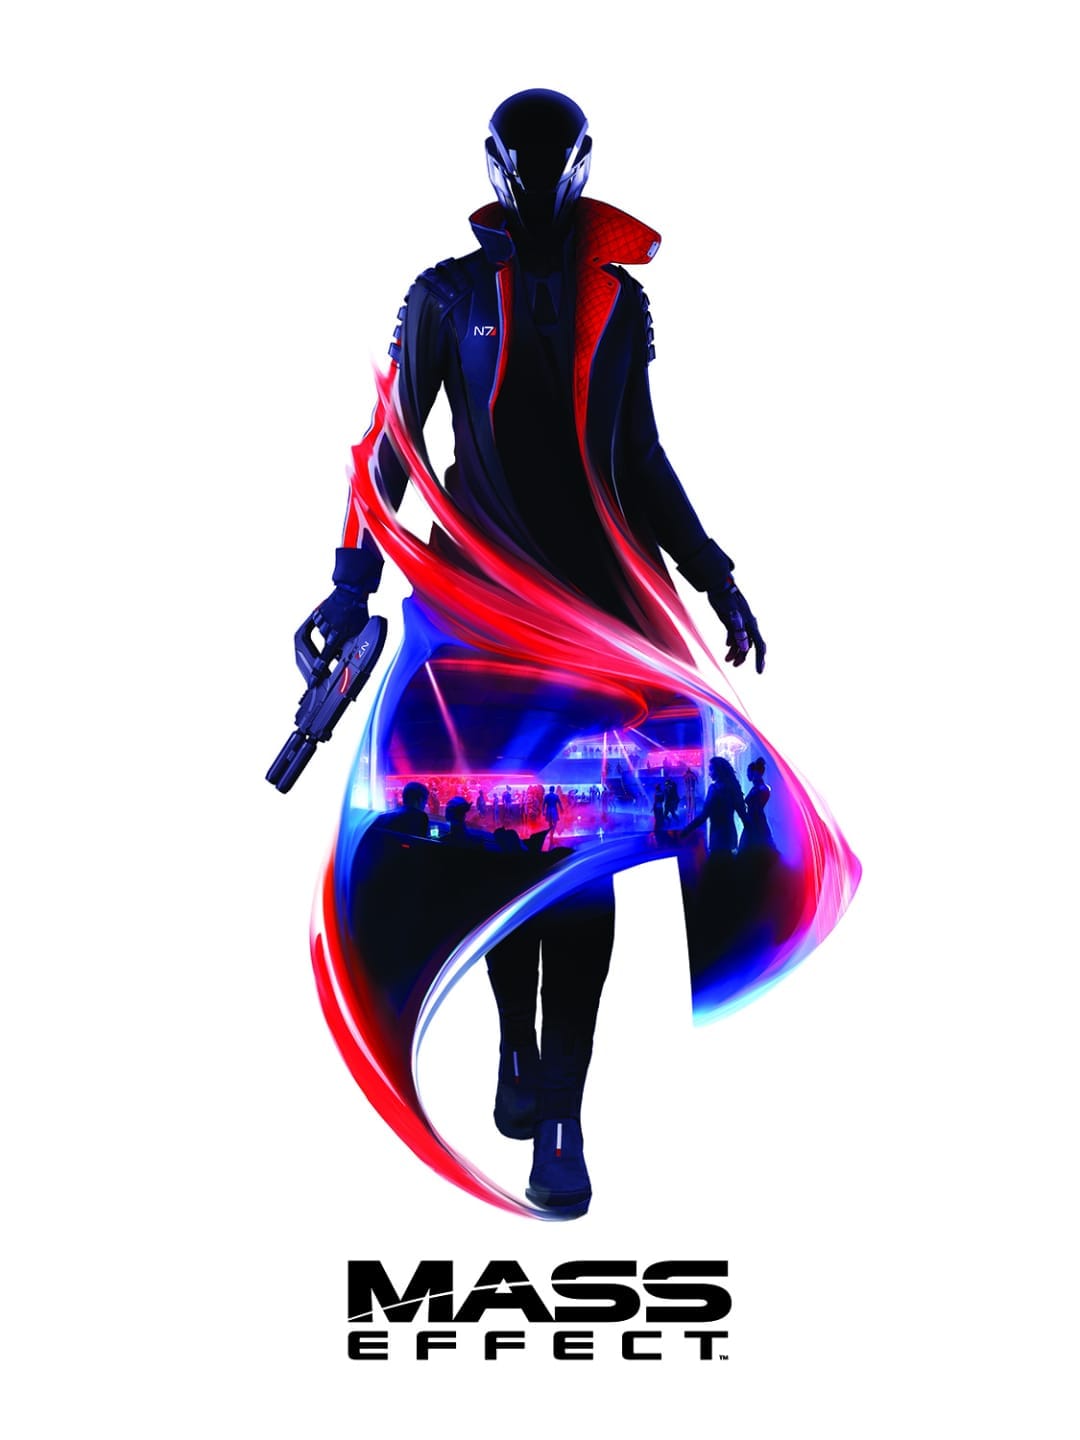 New artwork of a mysterious character for the new Mass Effect